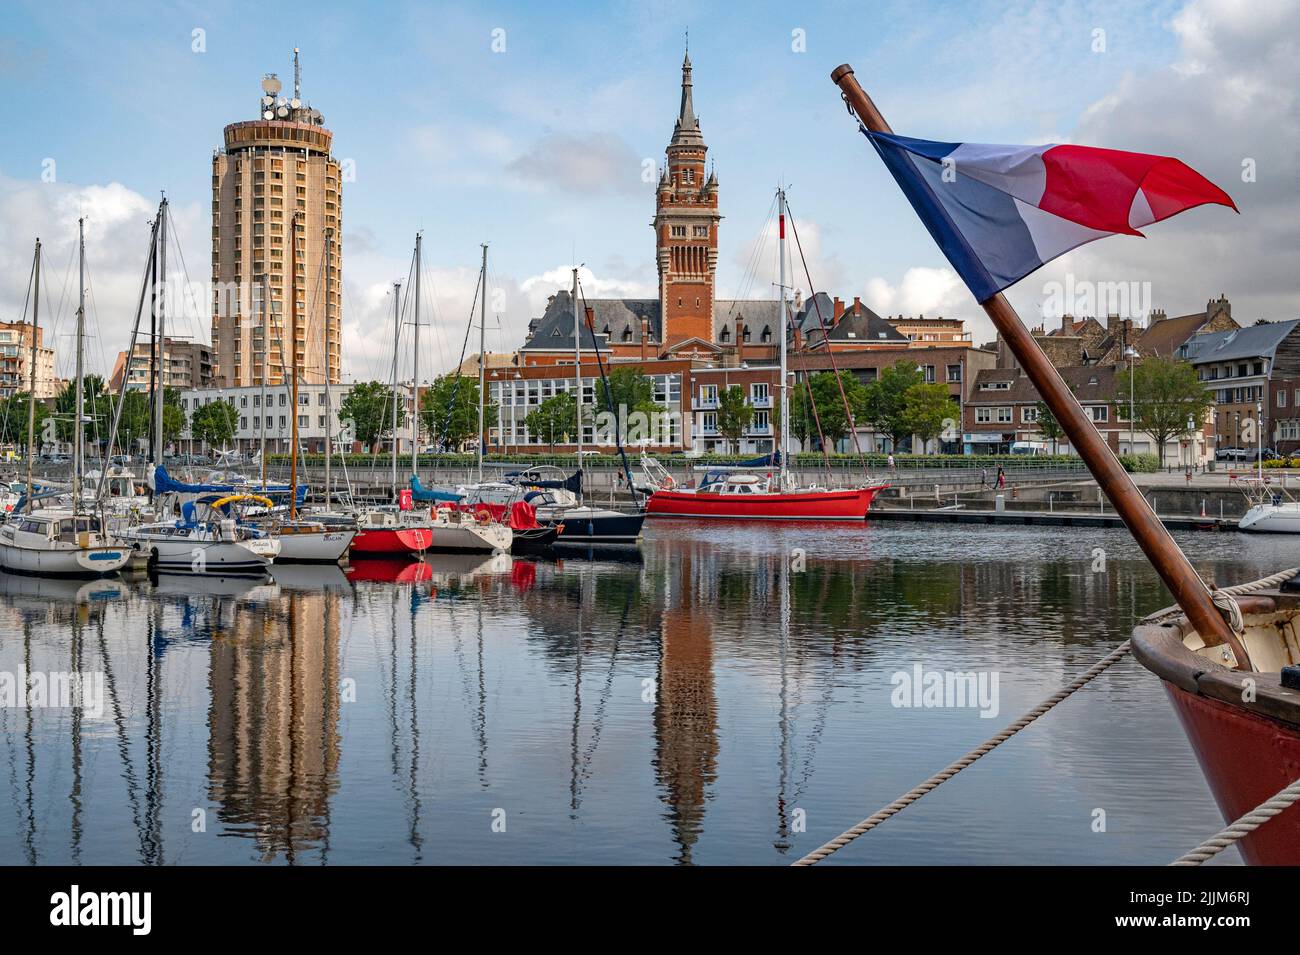 The  tour du Reuze (left) and belfry of the town hall (rigth) seen from the port, Dunkerque, France Stock Photo